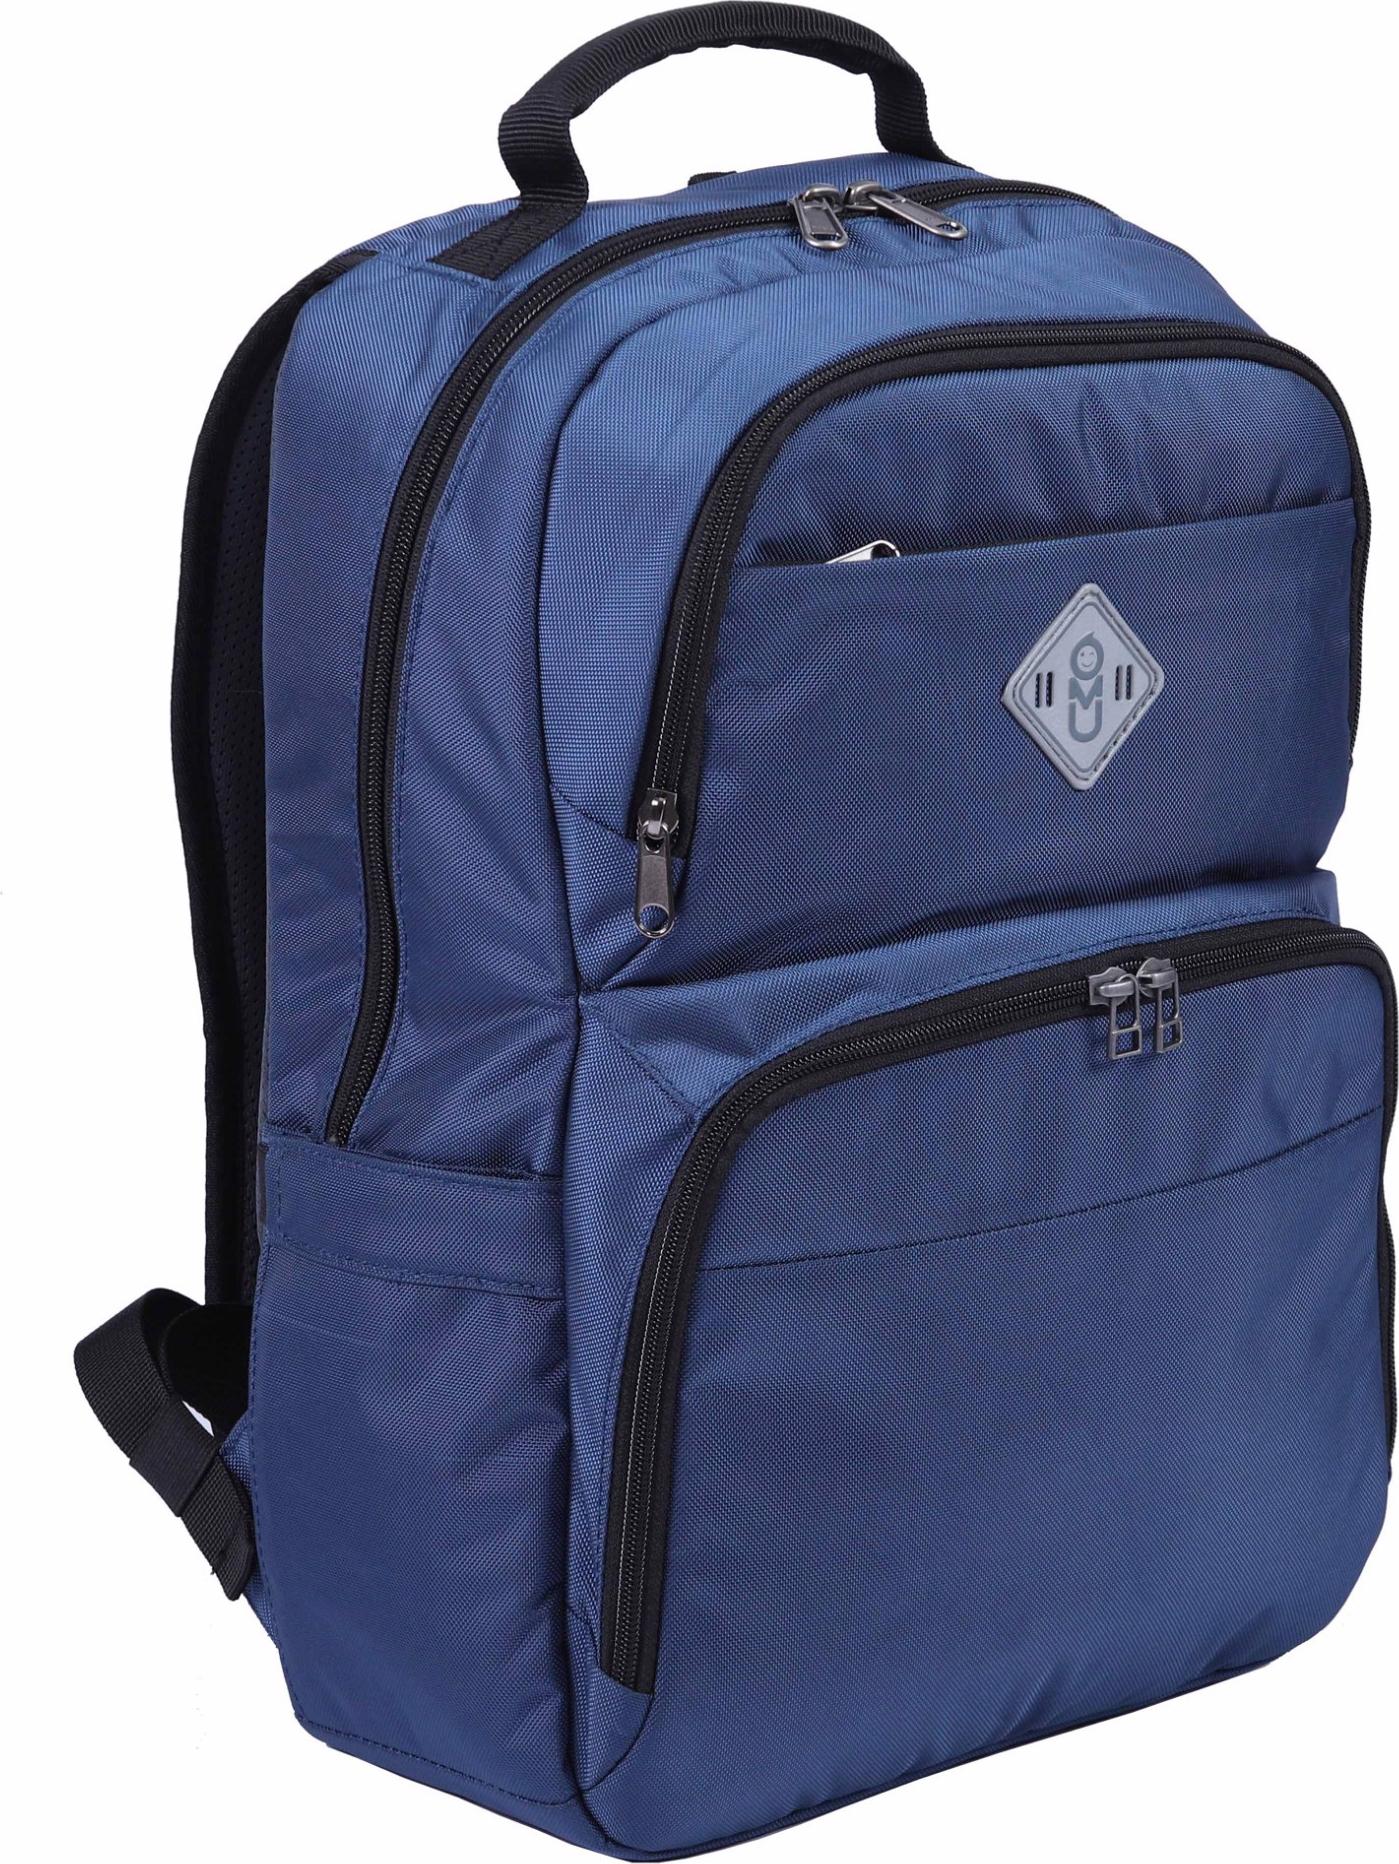 UMO DYNAMIC BackPack Navy- Balo Laptop Cao Cấp